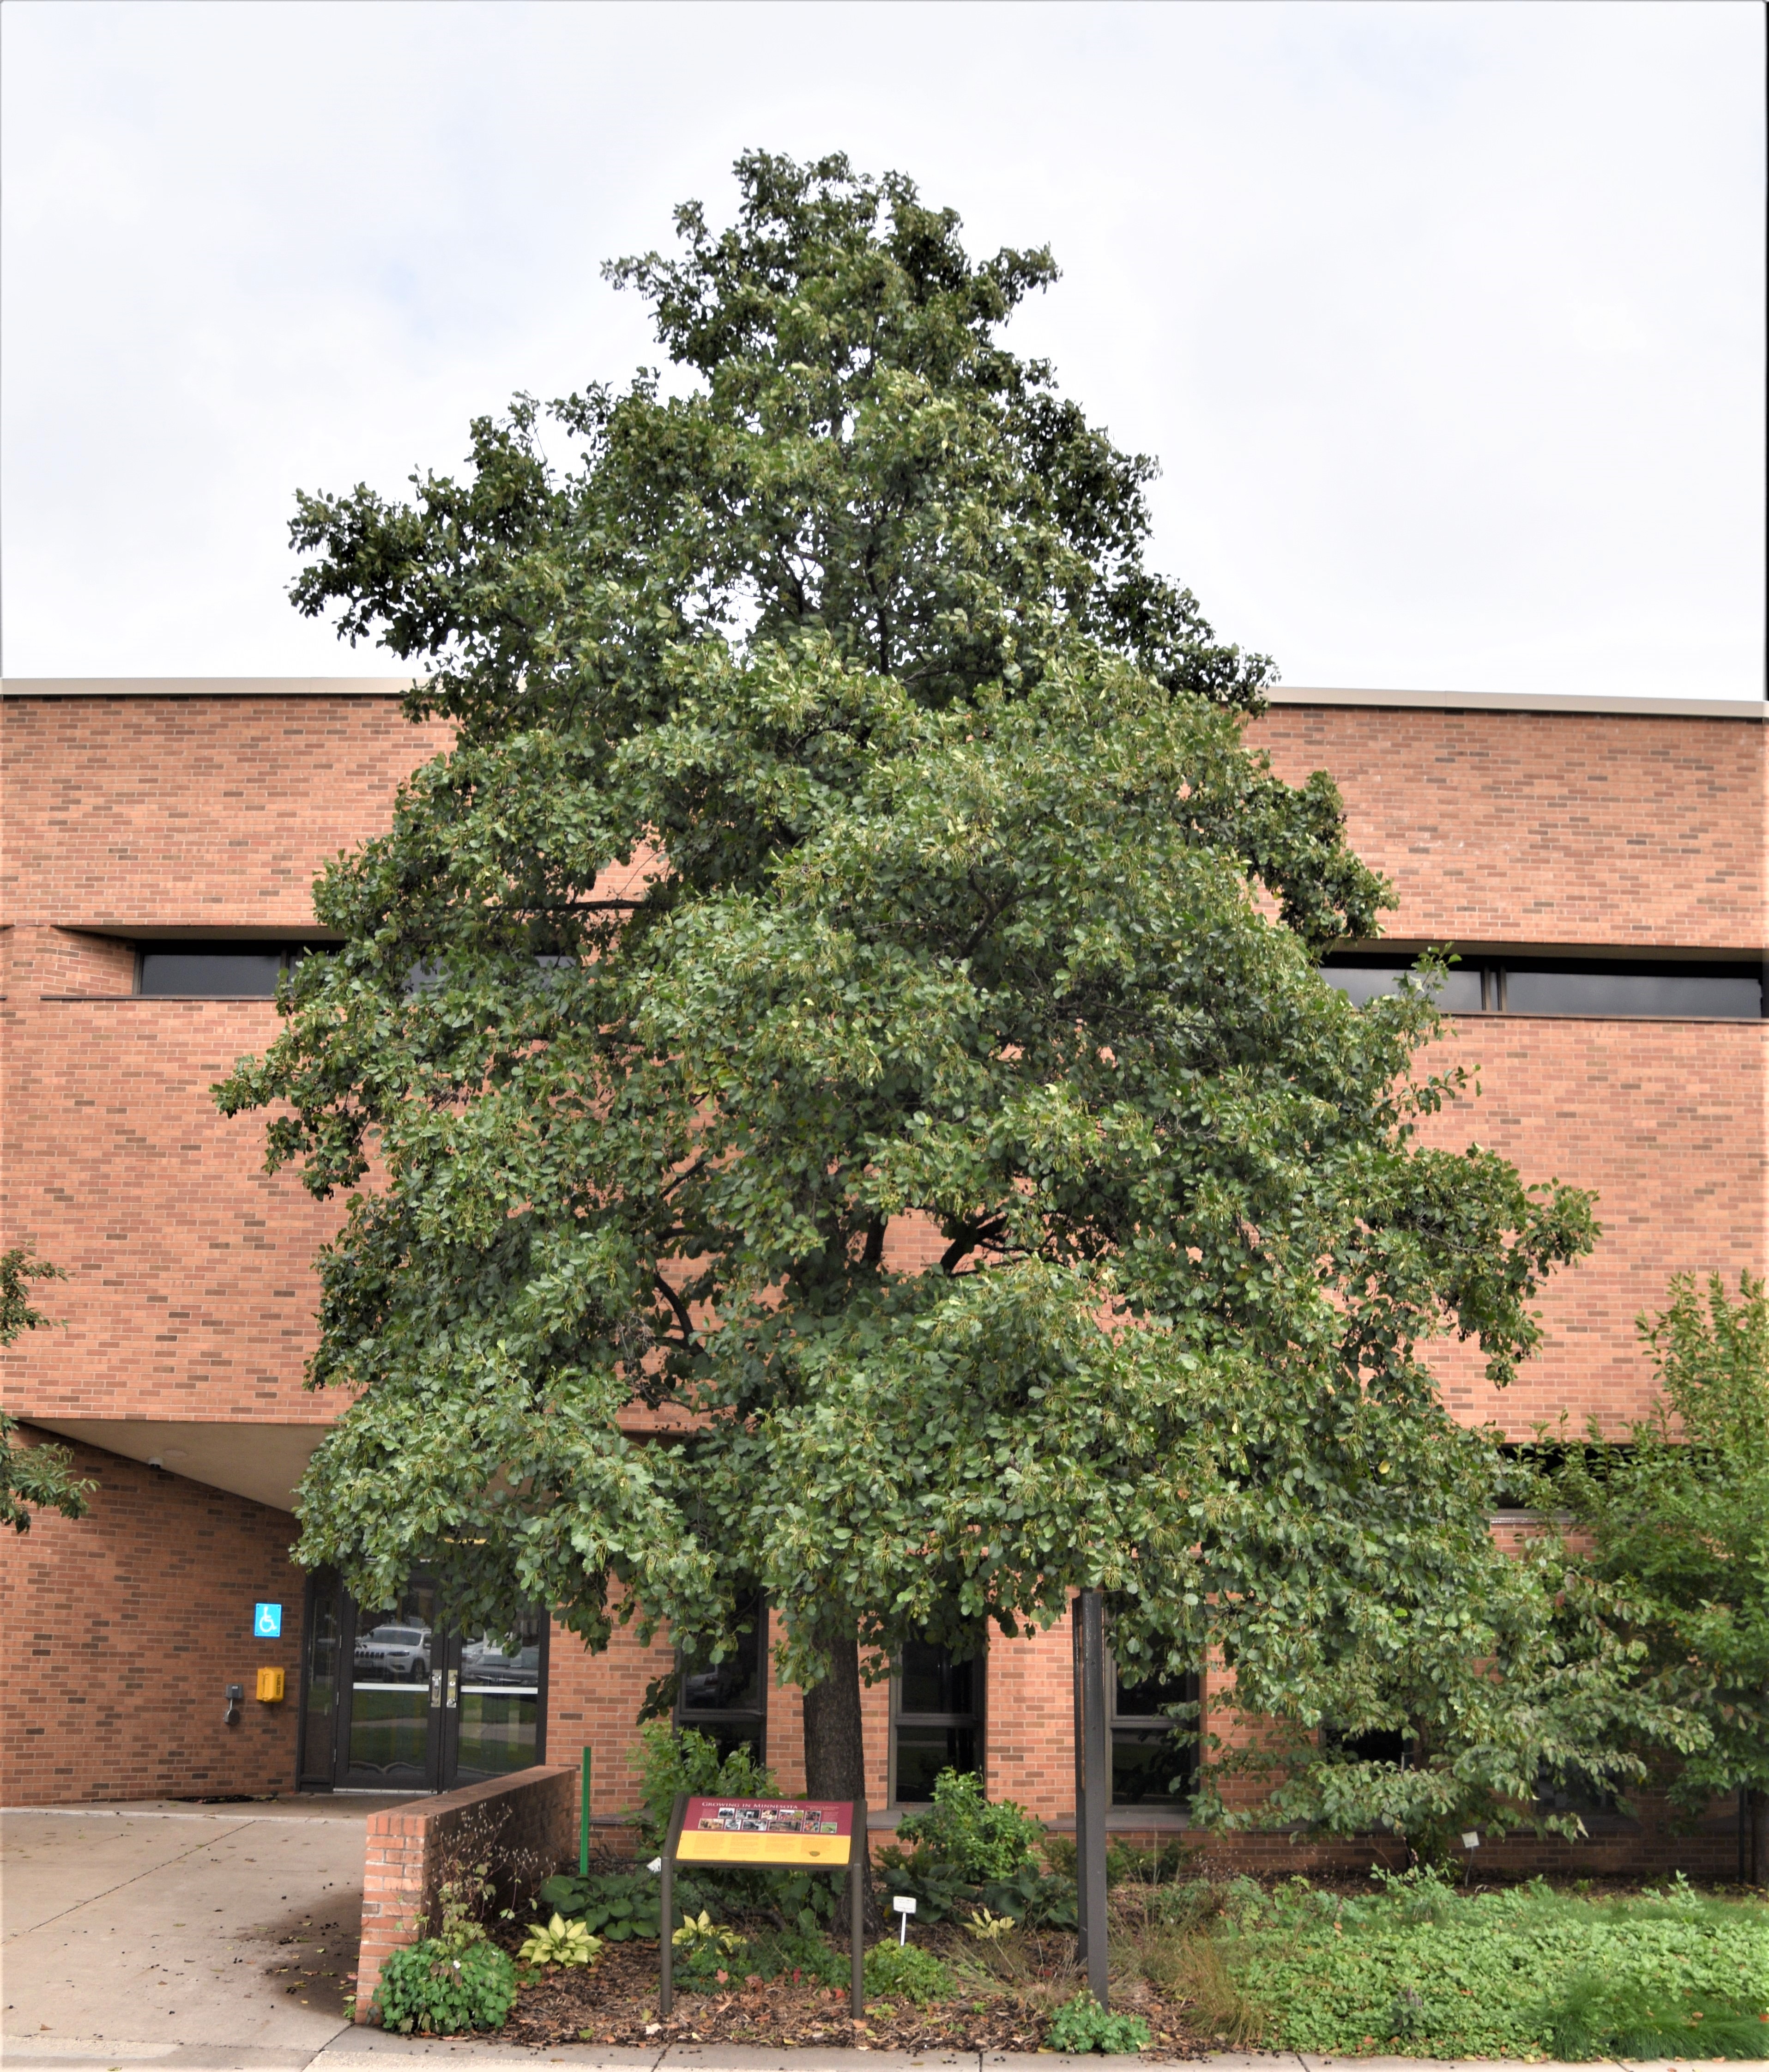 Picture of larger Alder tree infront of a building for scale